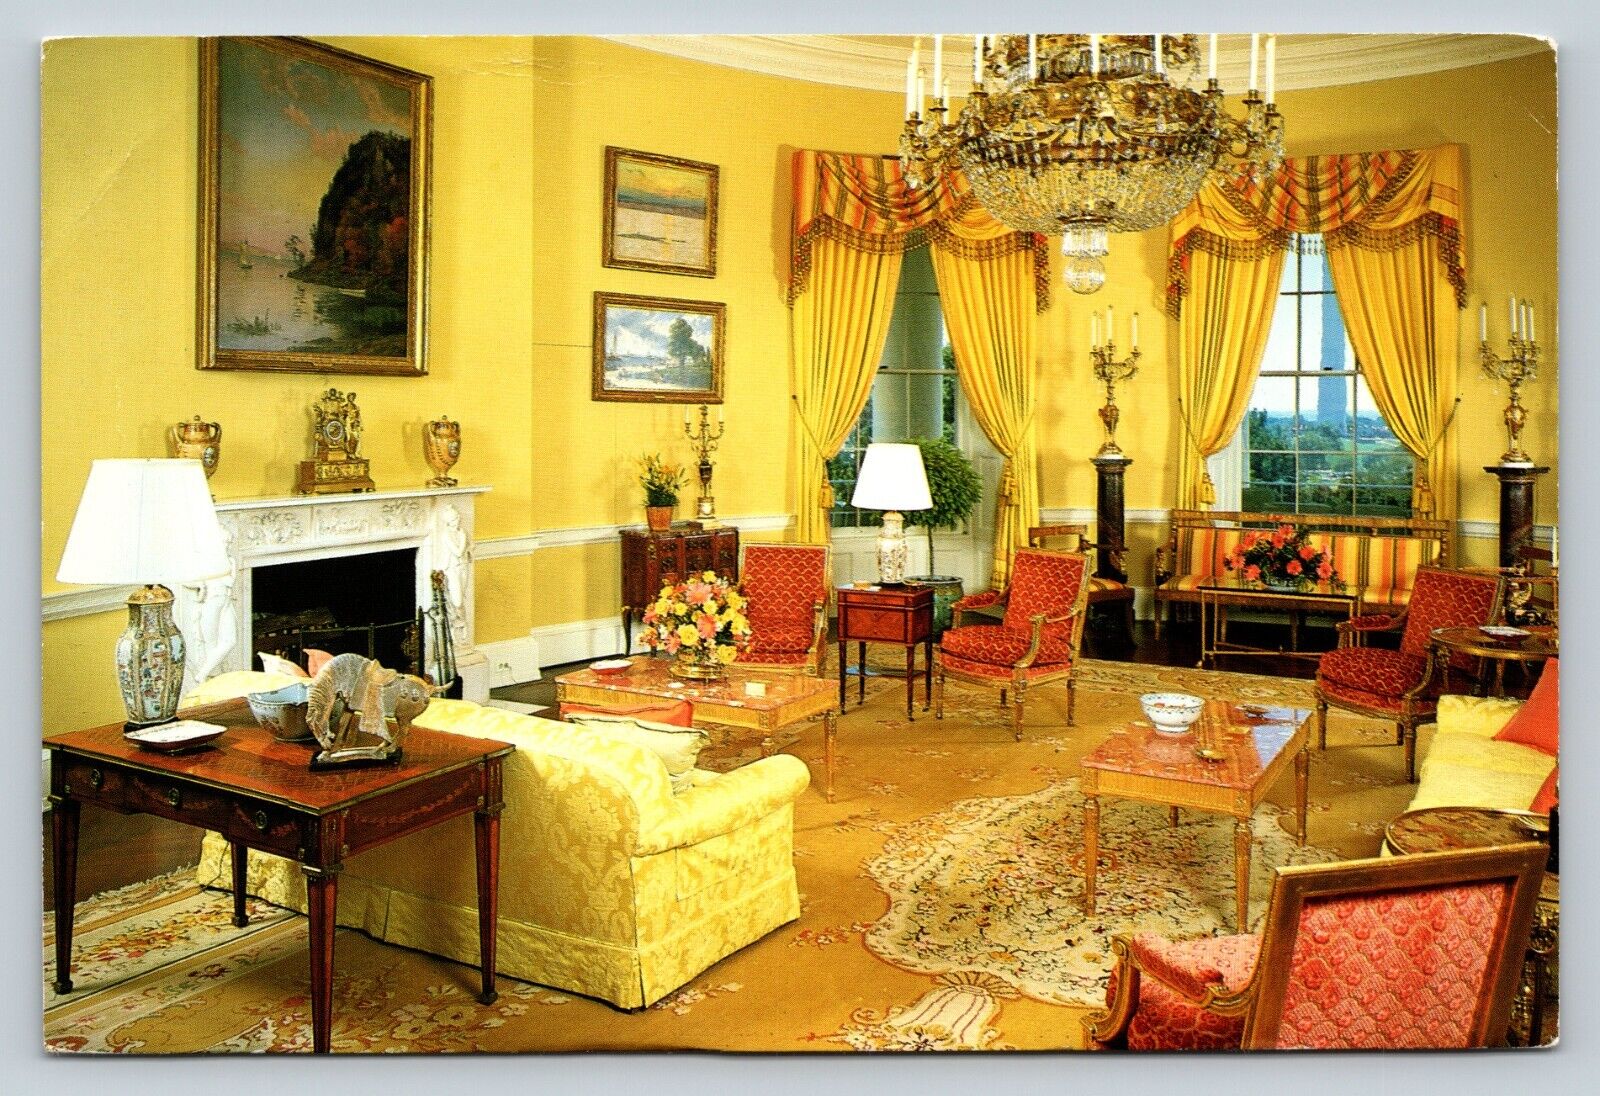 French Furnishings in Yellow Oval Room at White House 4x6 VINTAGE Postcard 1571